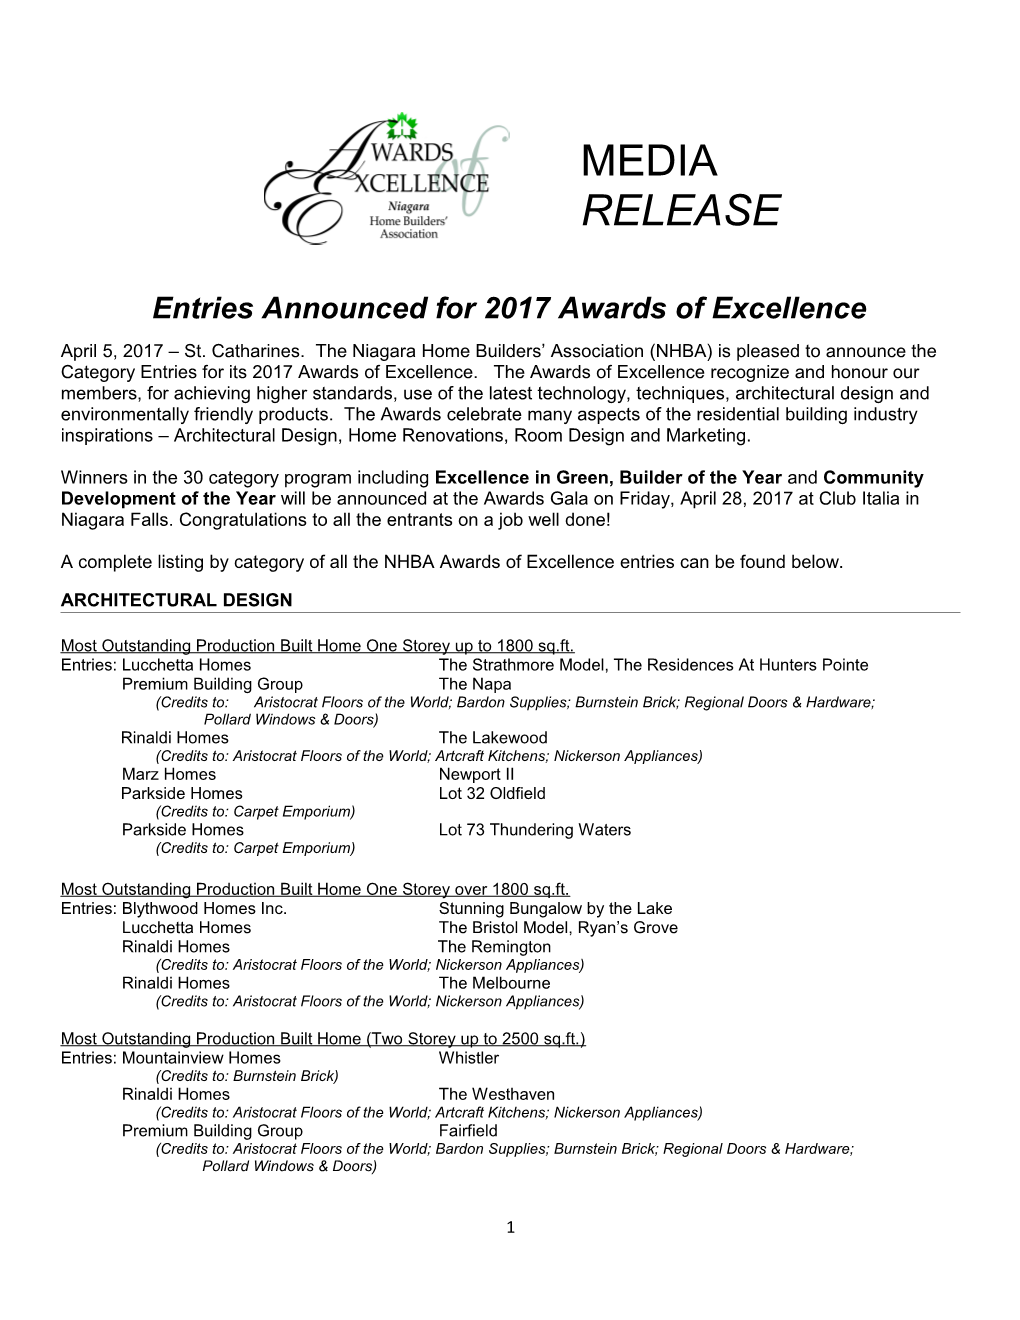 Entries Announced for 2017 Awards of Excellence